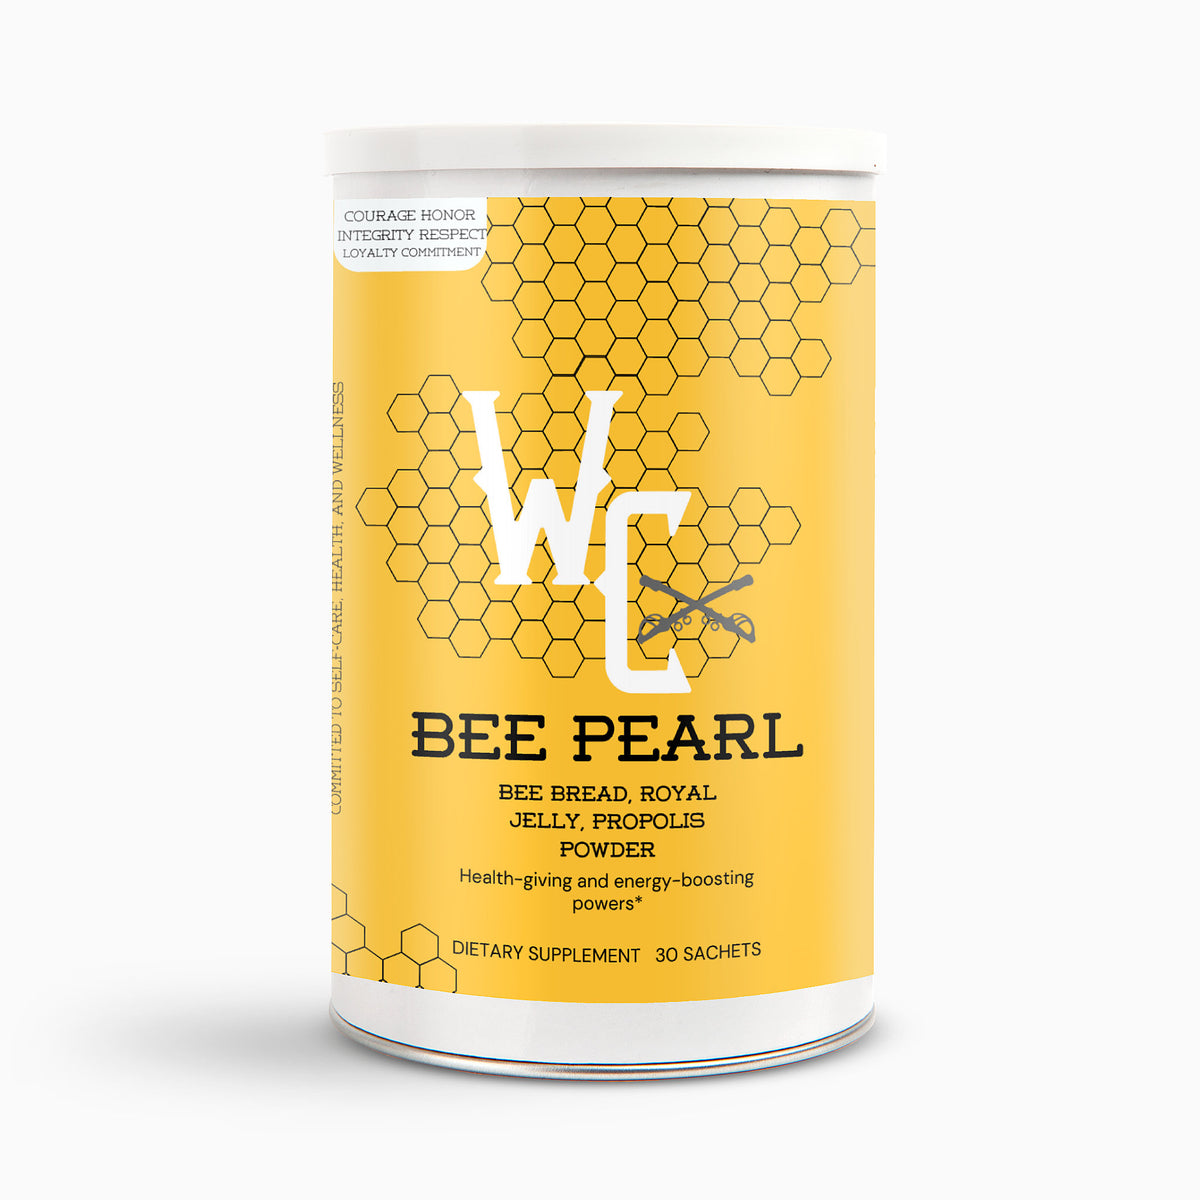 Bee Pearl Powder – FitWise Nutrition